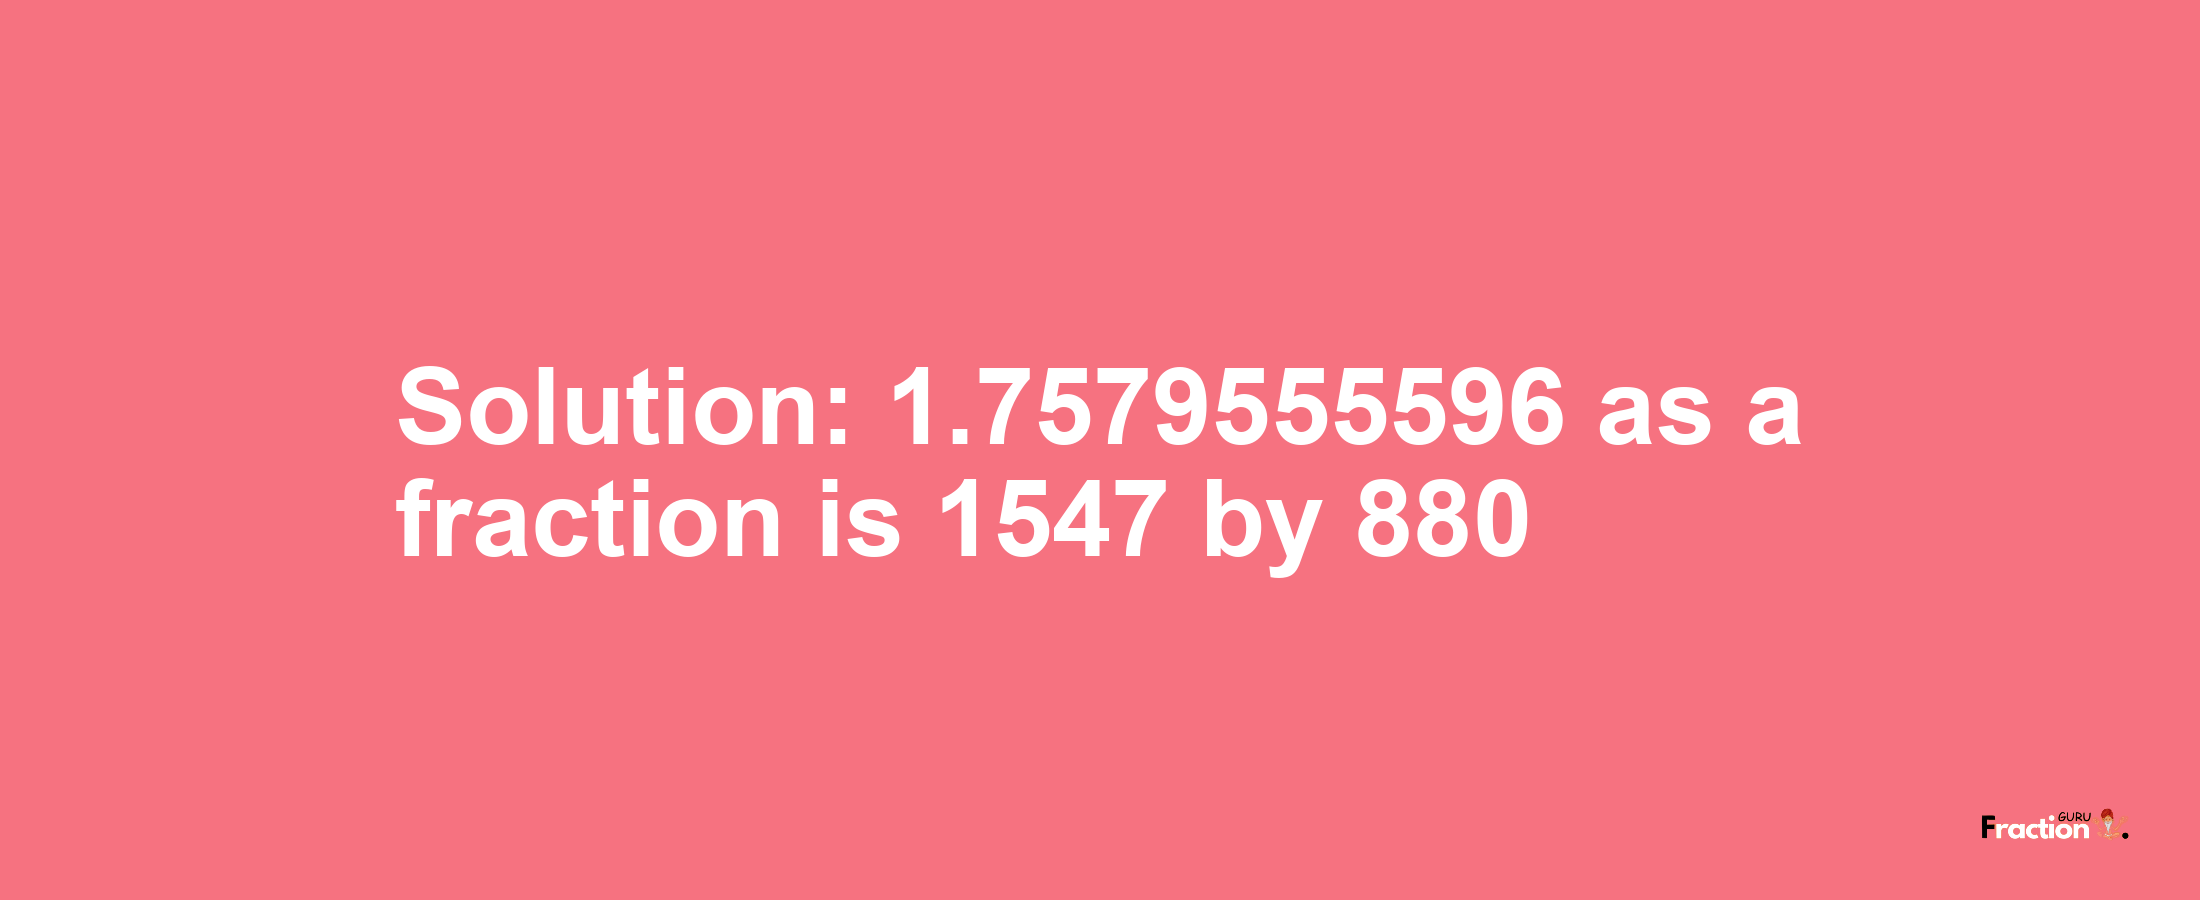 Solution:1.7579555596 as a fraction is 1547/880